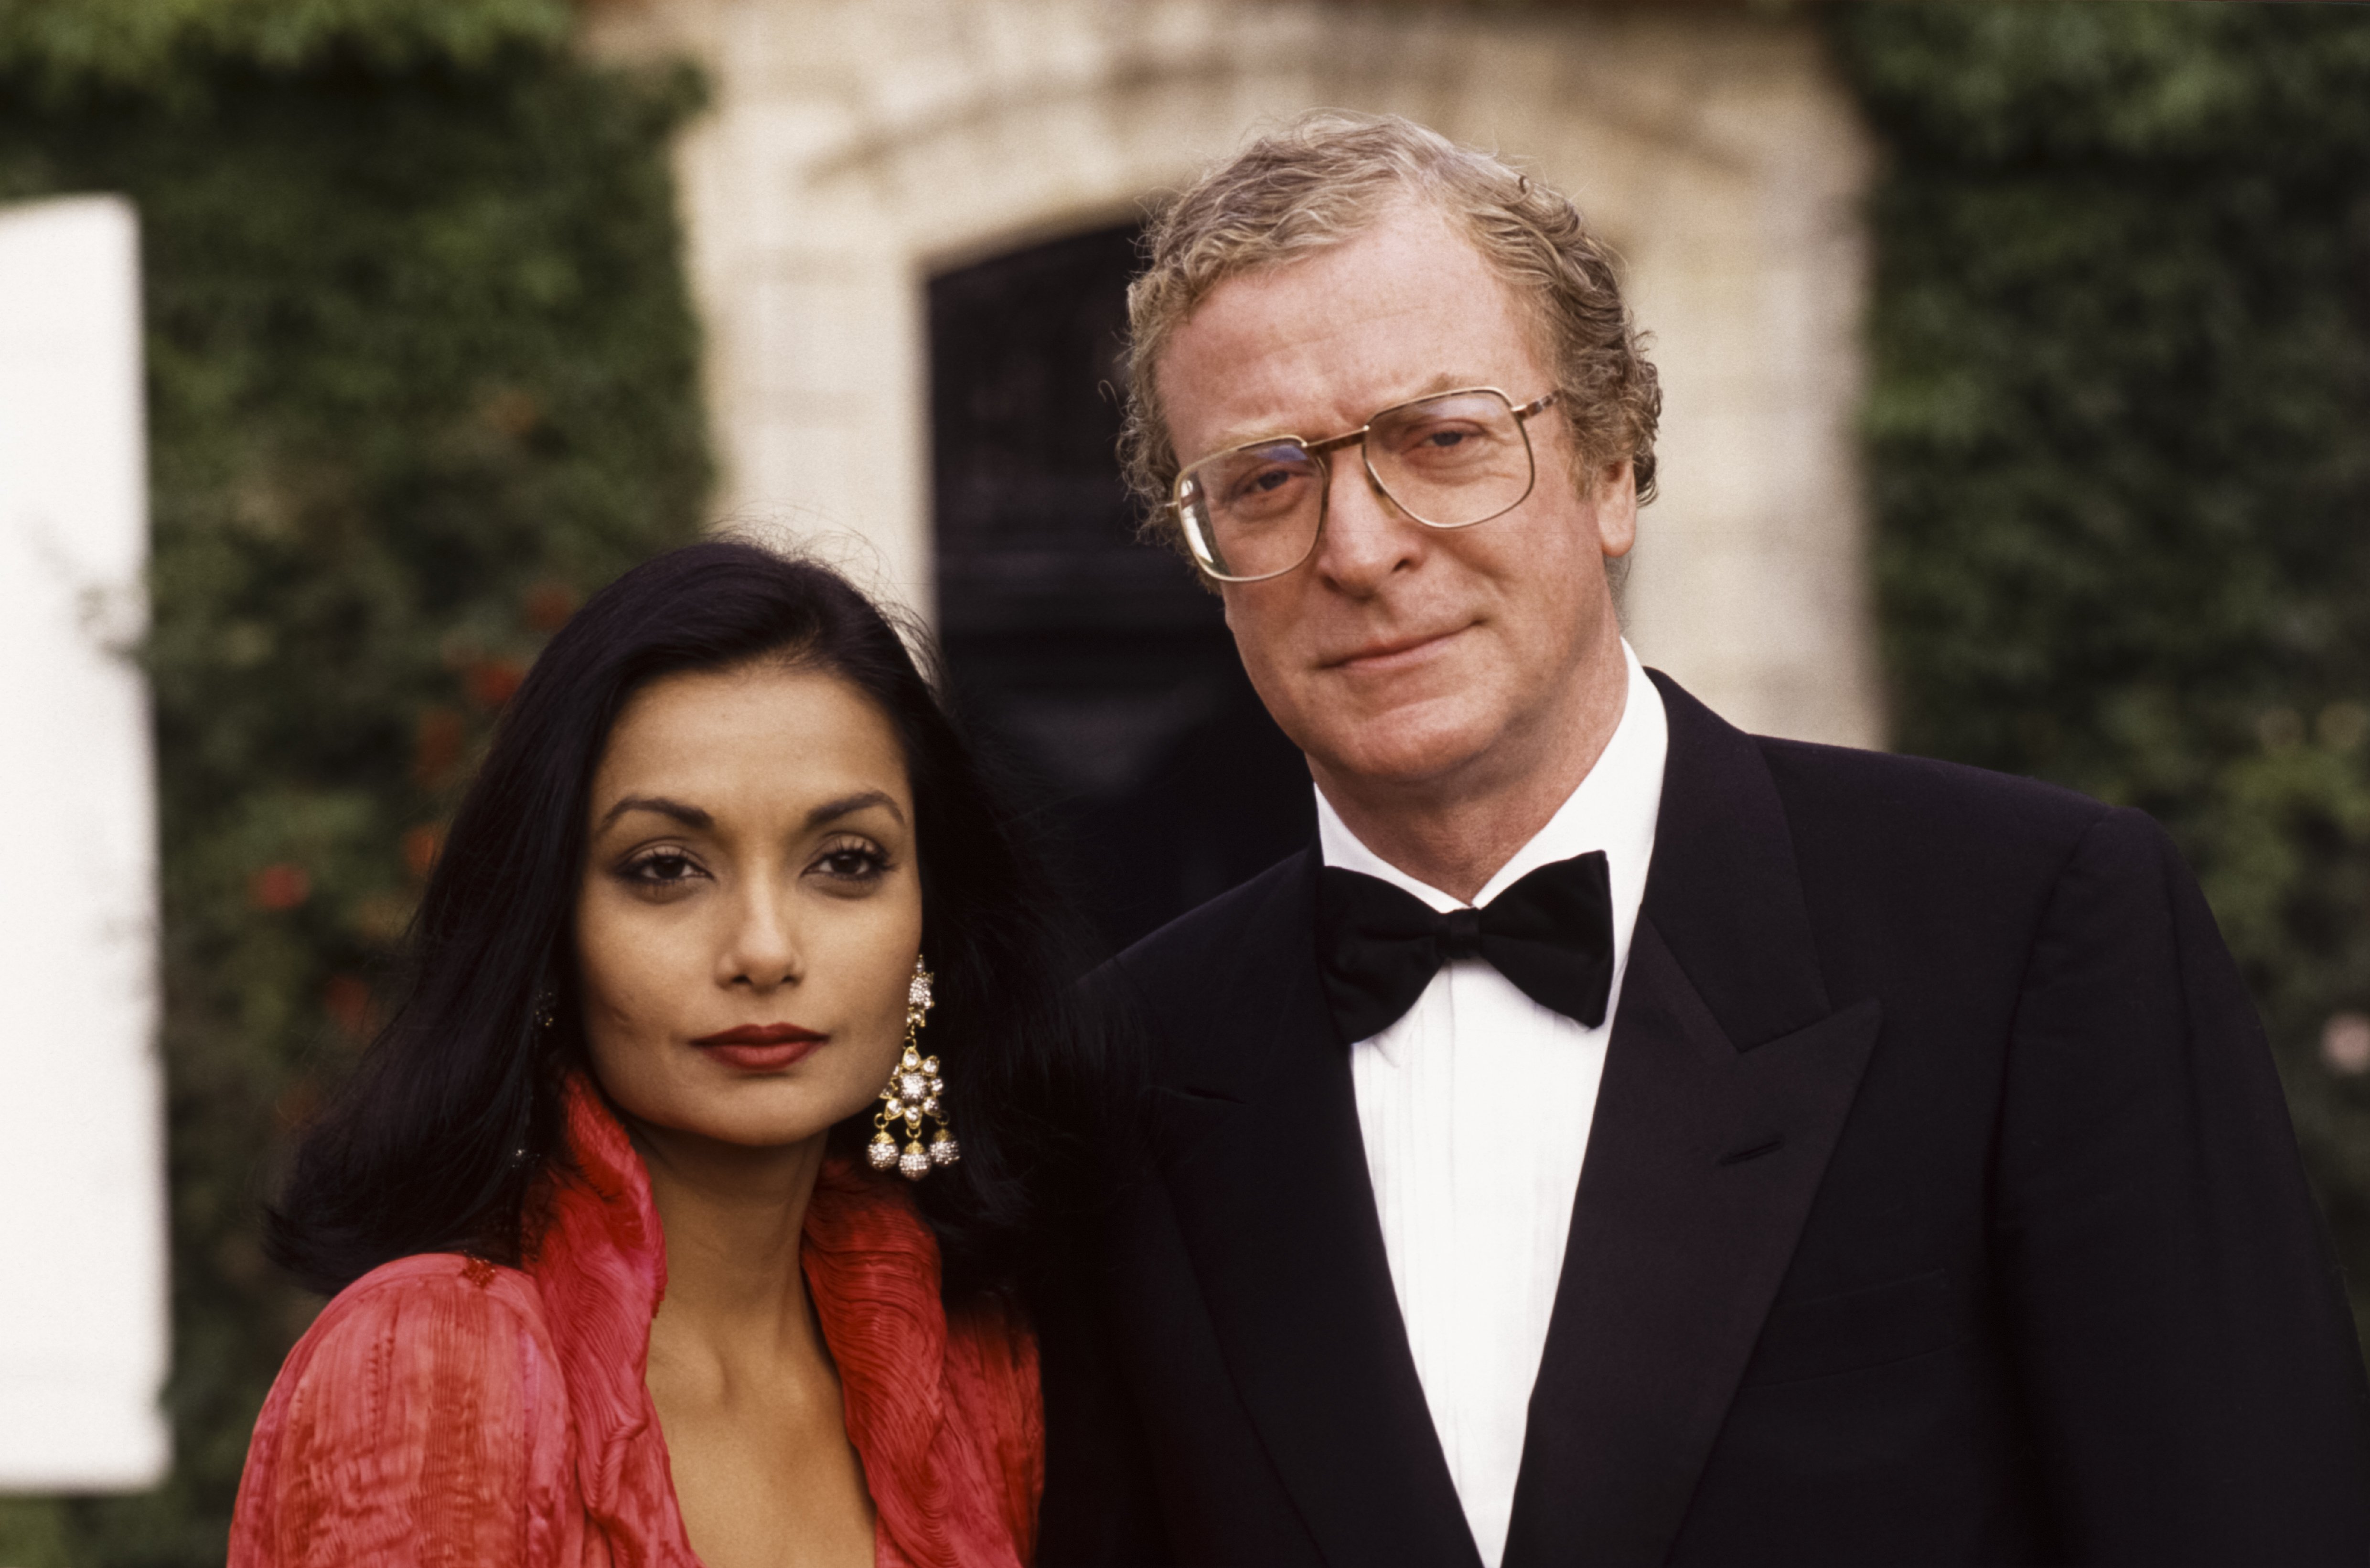 Michael Caine and Shakira Caine at the Flower Festival in Bordeaux, France, in June 1990. | Source: Getty Images